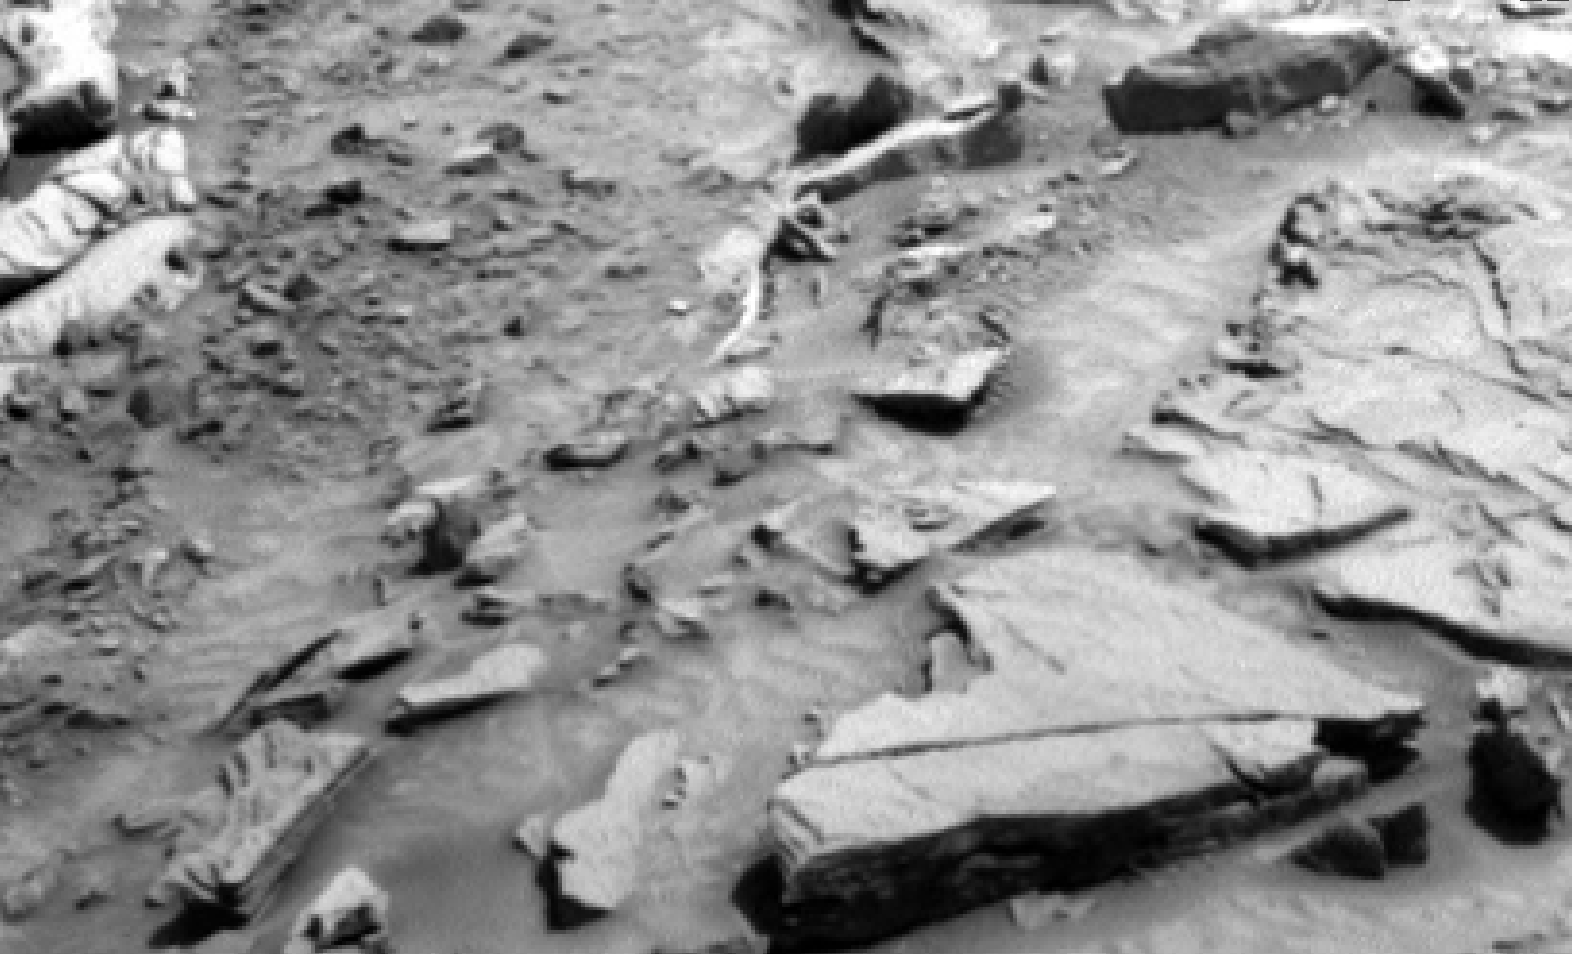 mars sol 1342 anomaly-artifacts 1 was life on mars